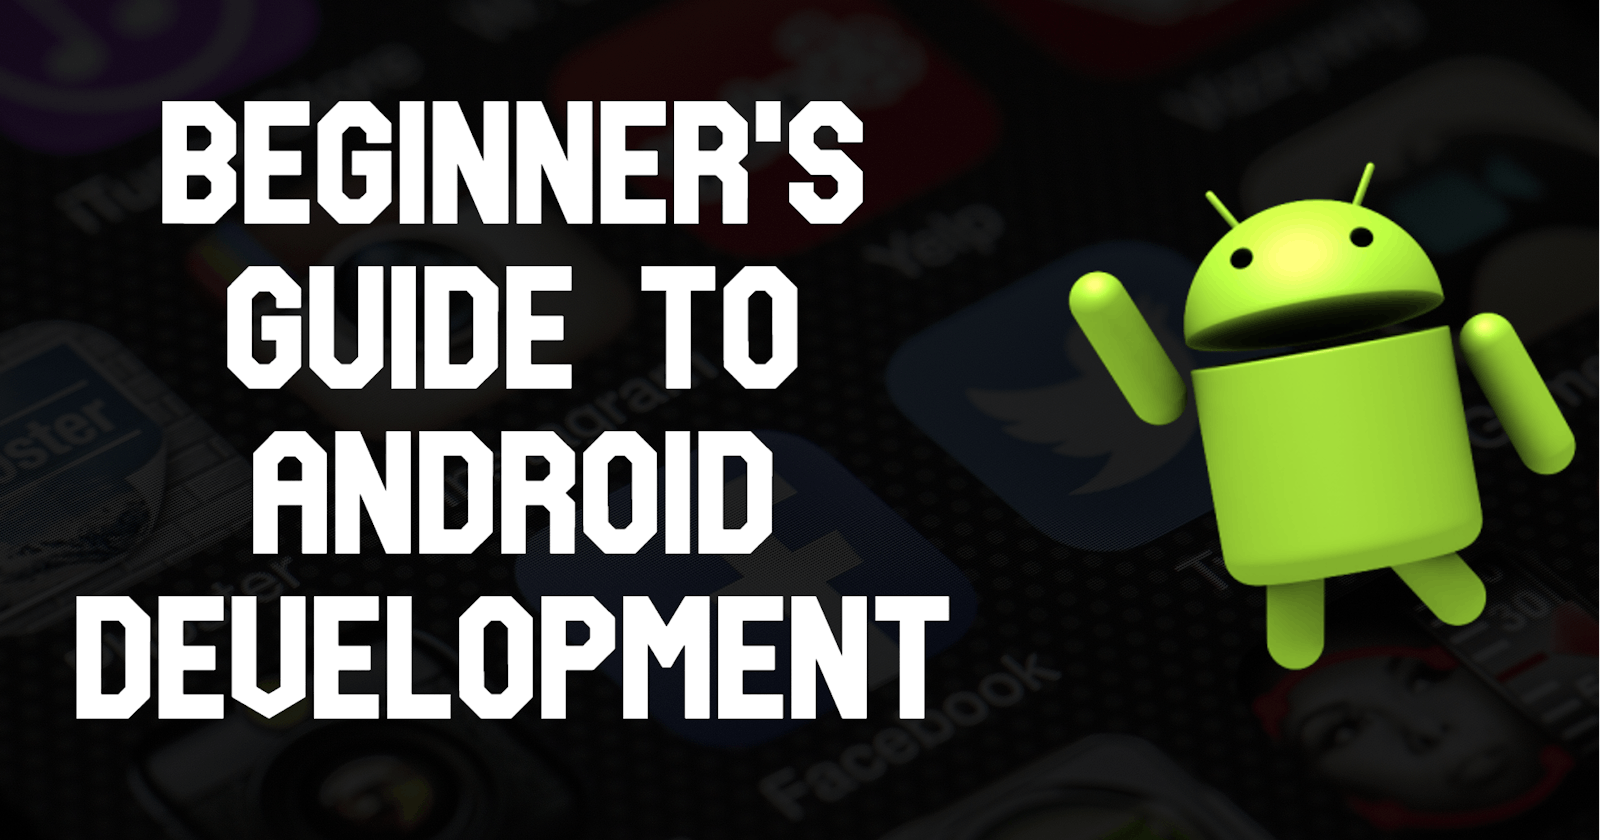 Beginner's Guide to Android Development